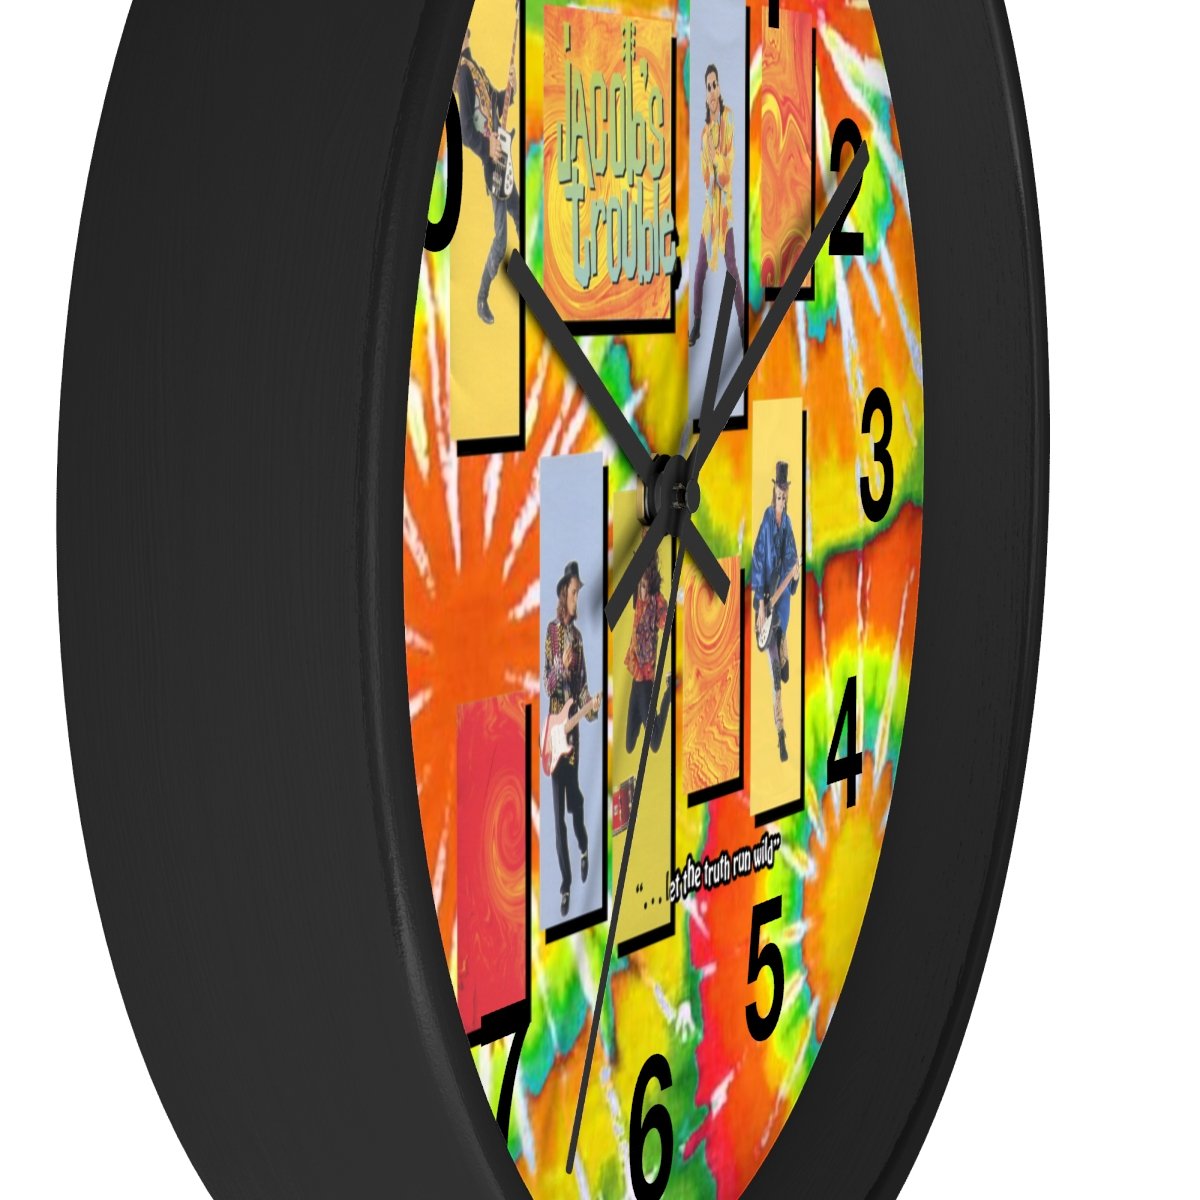 Jacob’s Trouble – “let the truth run wild” Wall clock